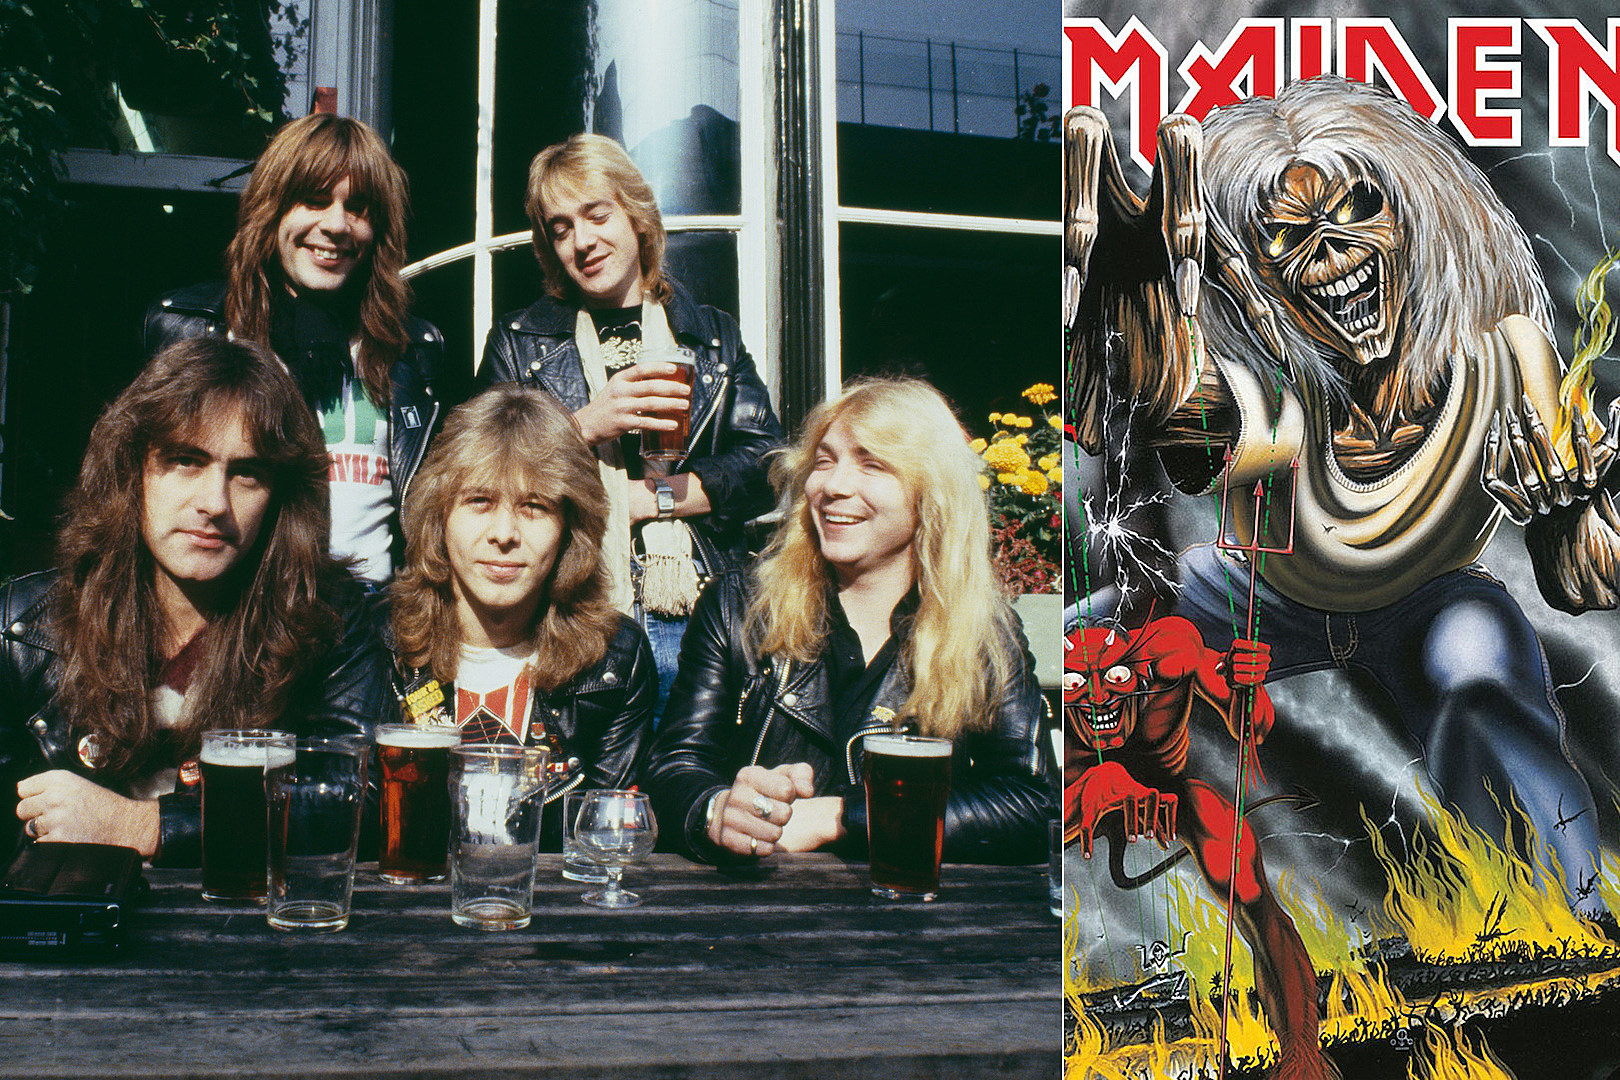 Maiden Sharing Historic Photos for 'The Beast' 40th Anniversary